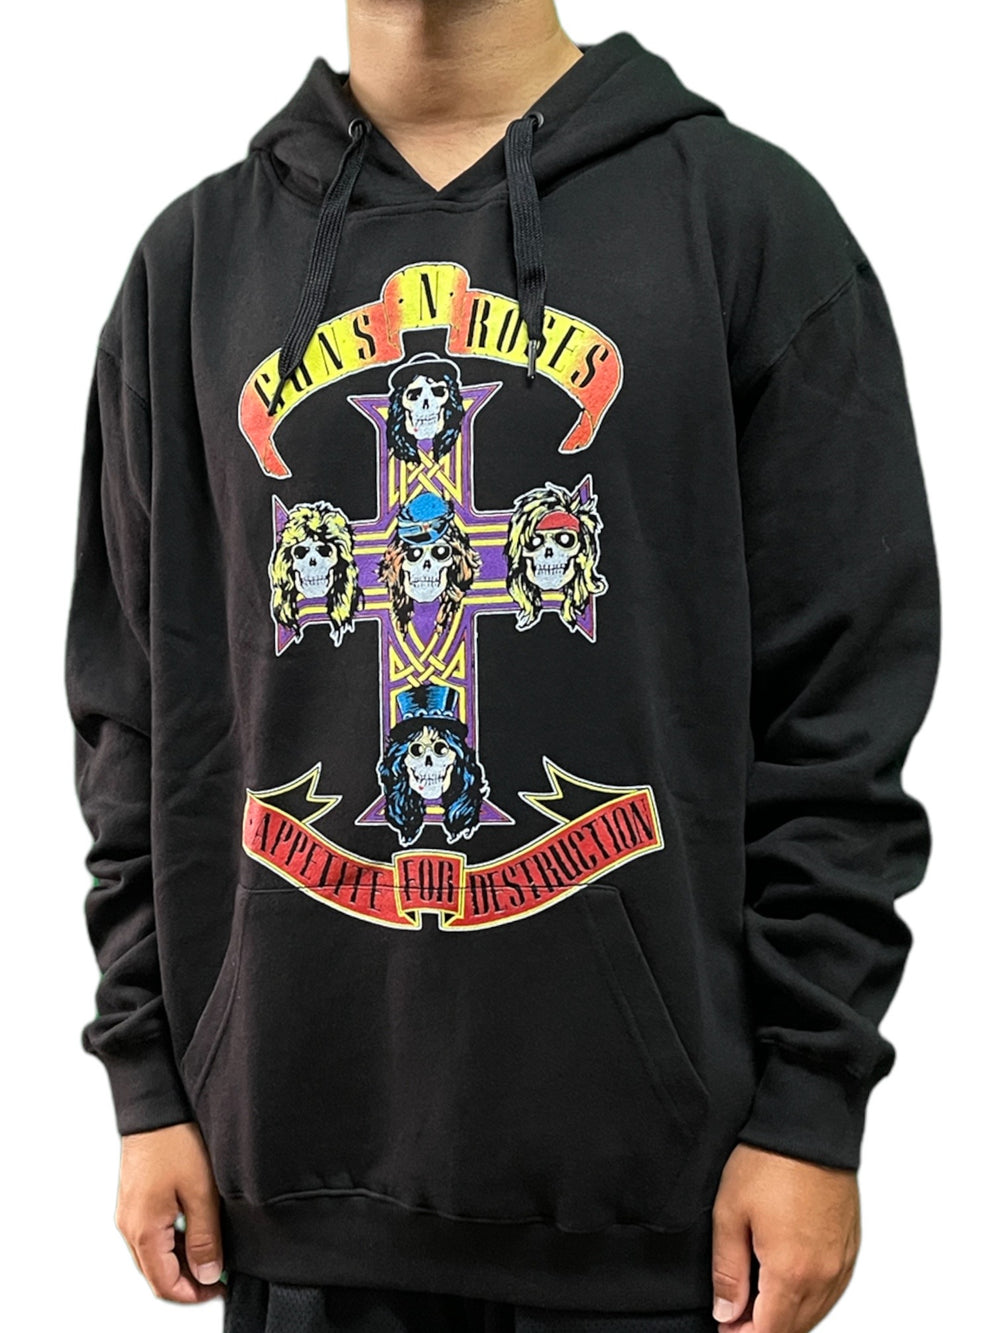 Guns N' Roses - Appetite Pullover Hoodie Unisex Official Brand New Various Sizes